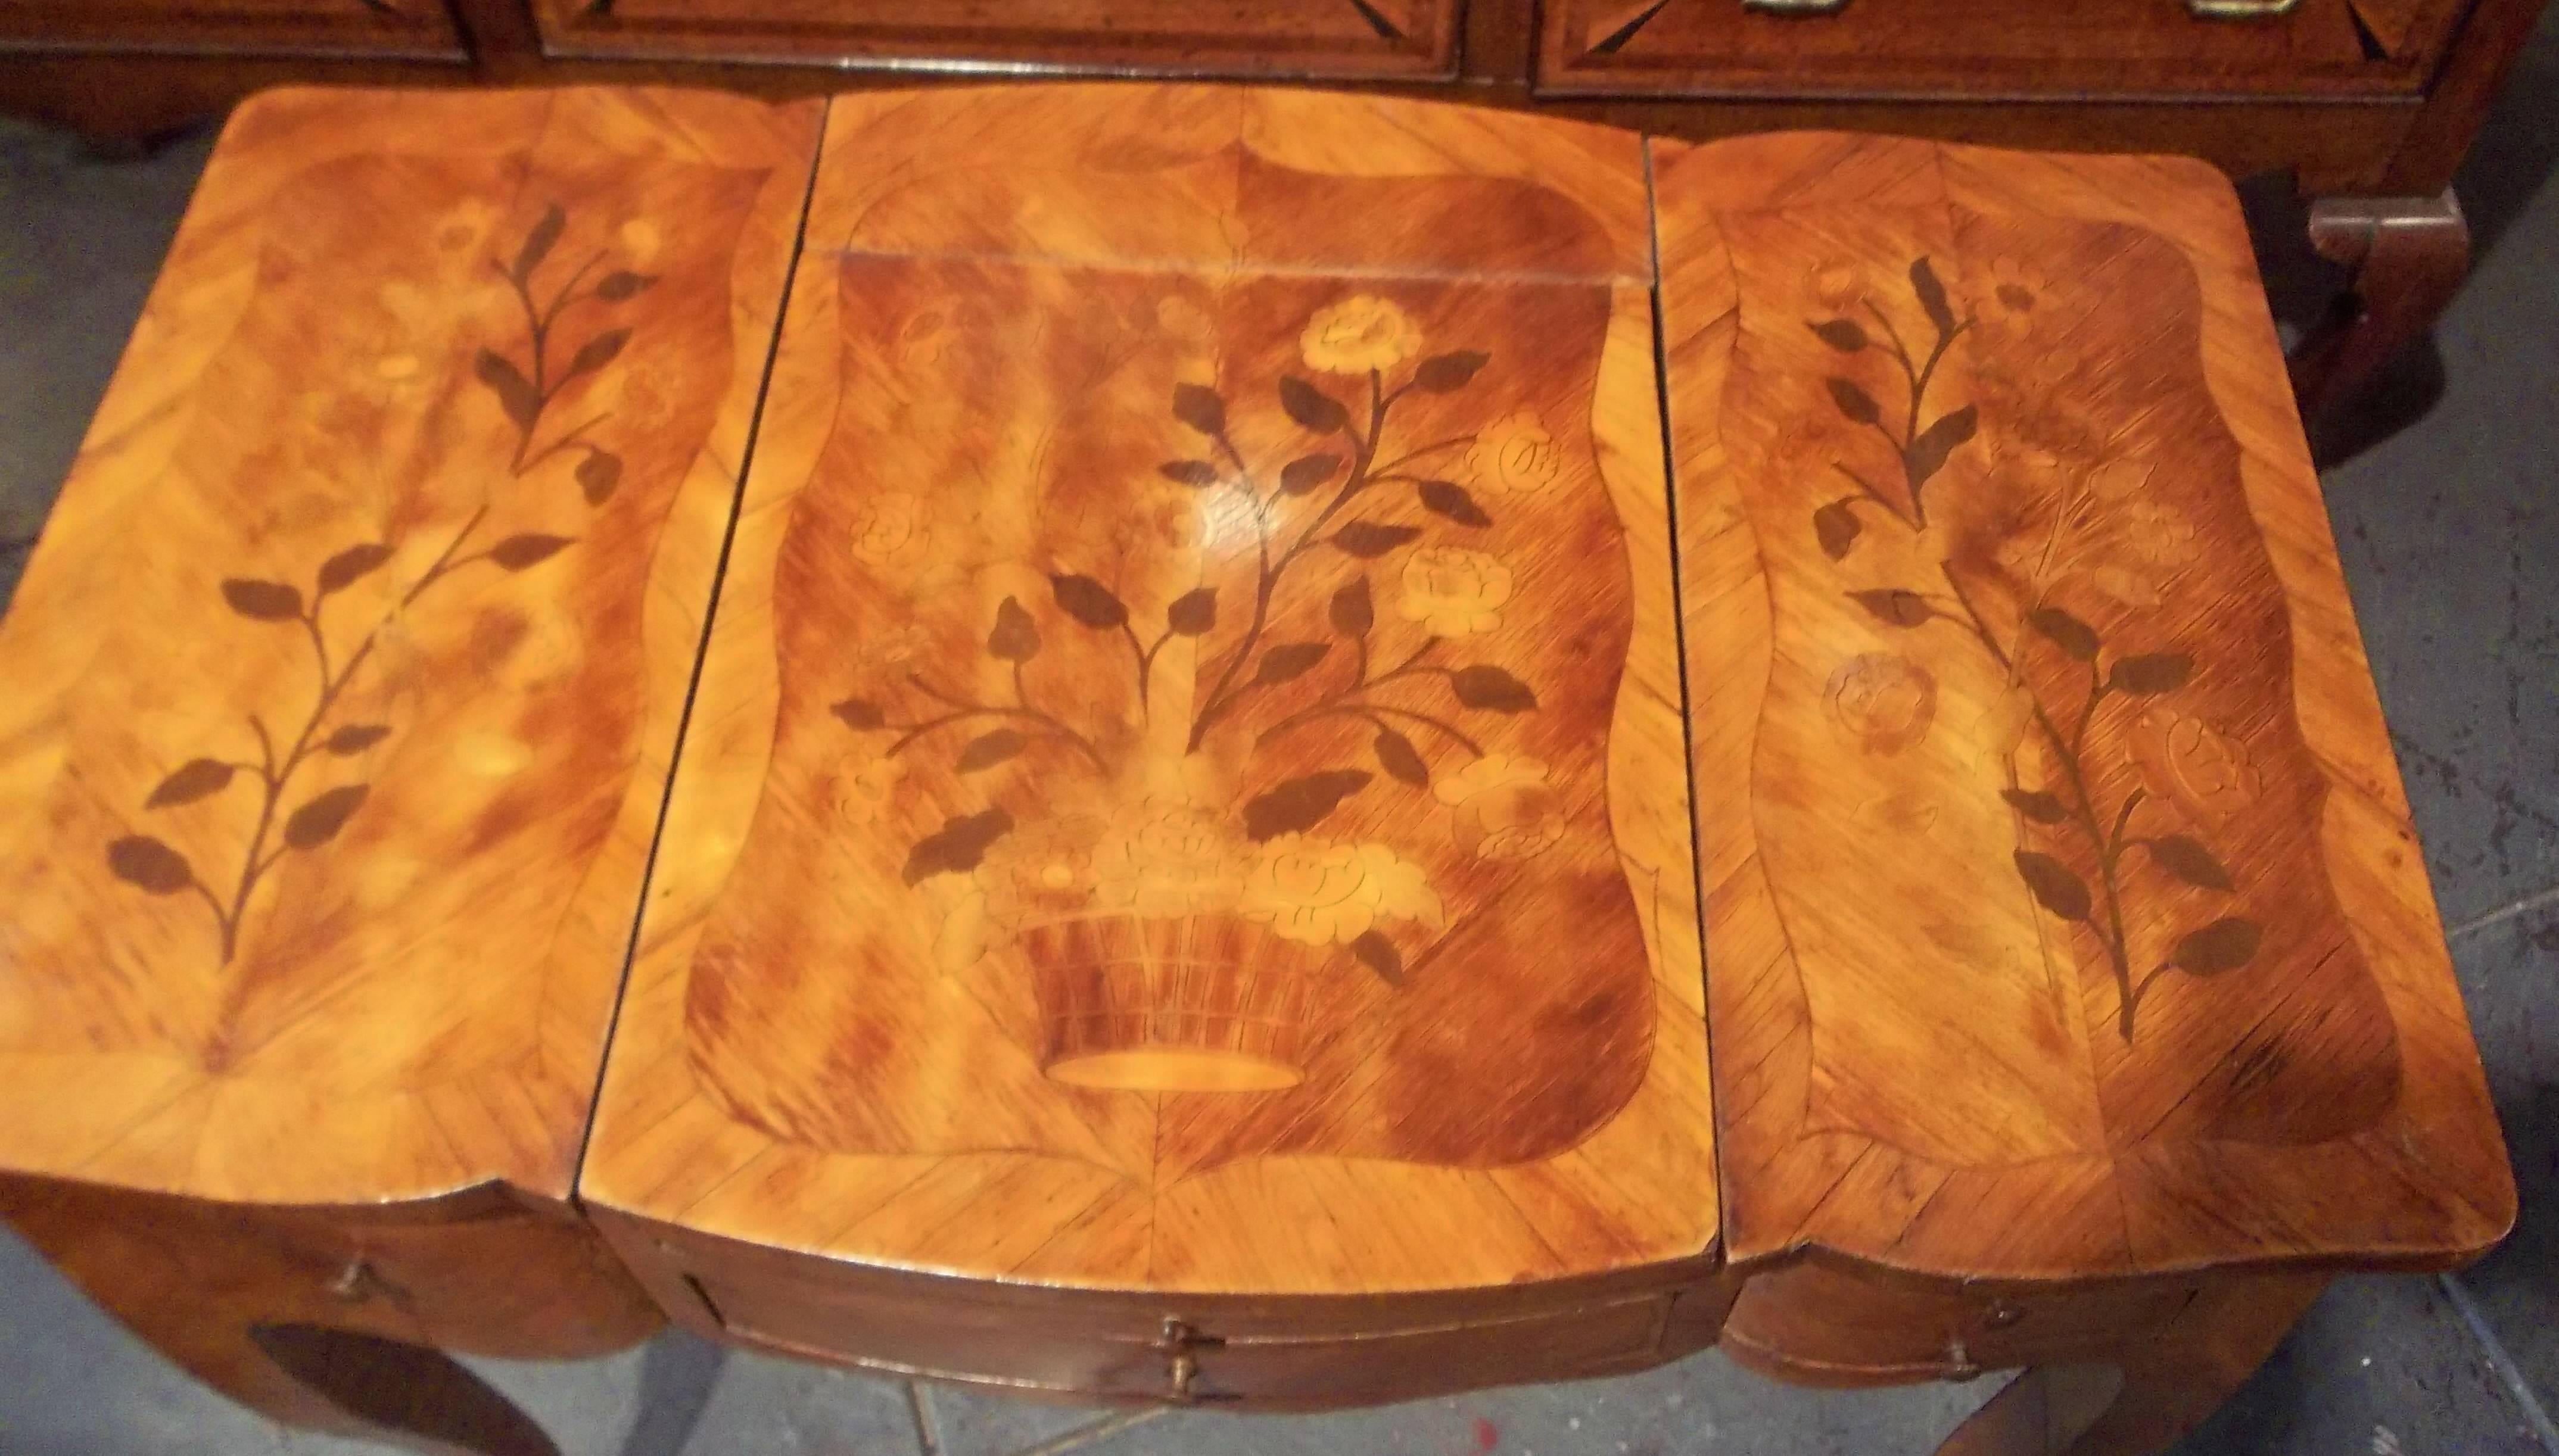 Originally a tri-fold poydreuse or vanity but these days almost always a bedside table or lamp table. Tulipwood with the red and light brown fading that distinguishes this wood as it ages. Nice overall cognac color. Each top panel in stained floral